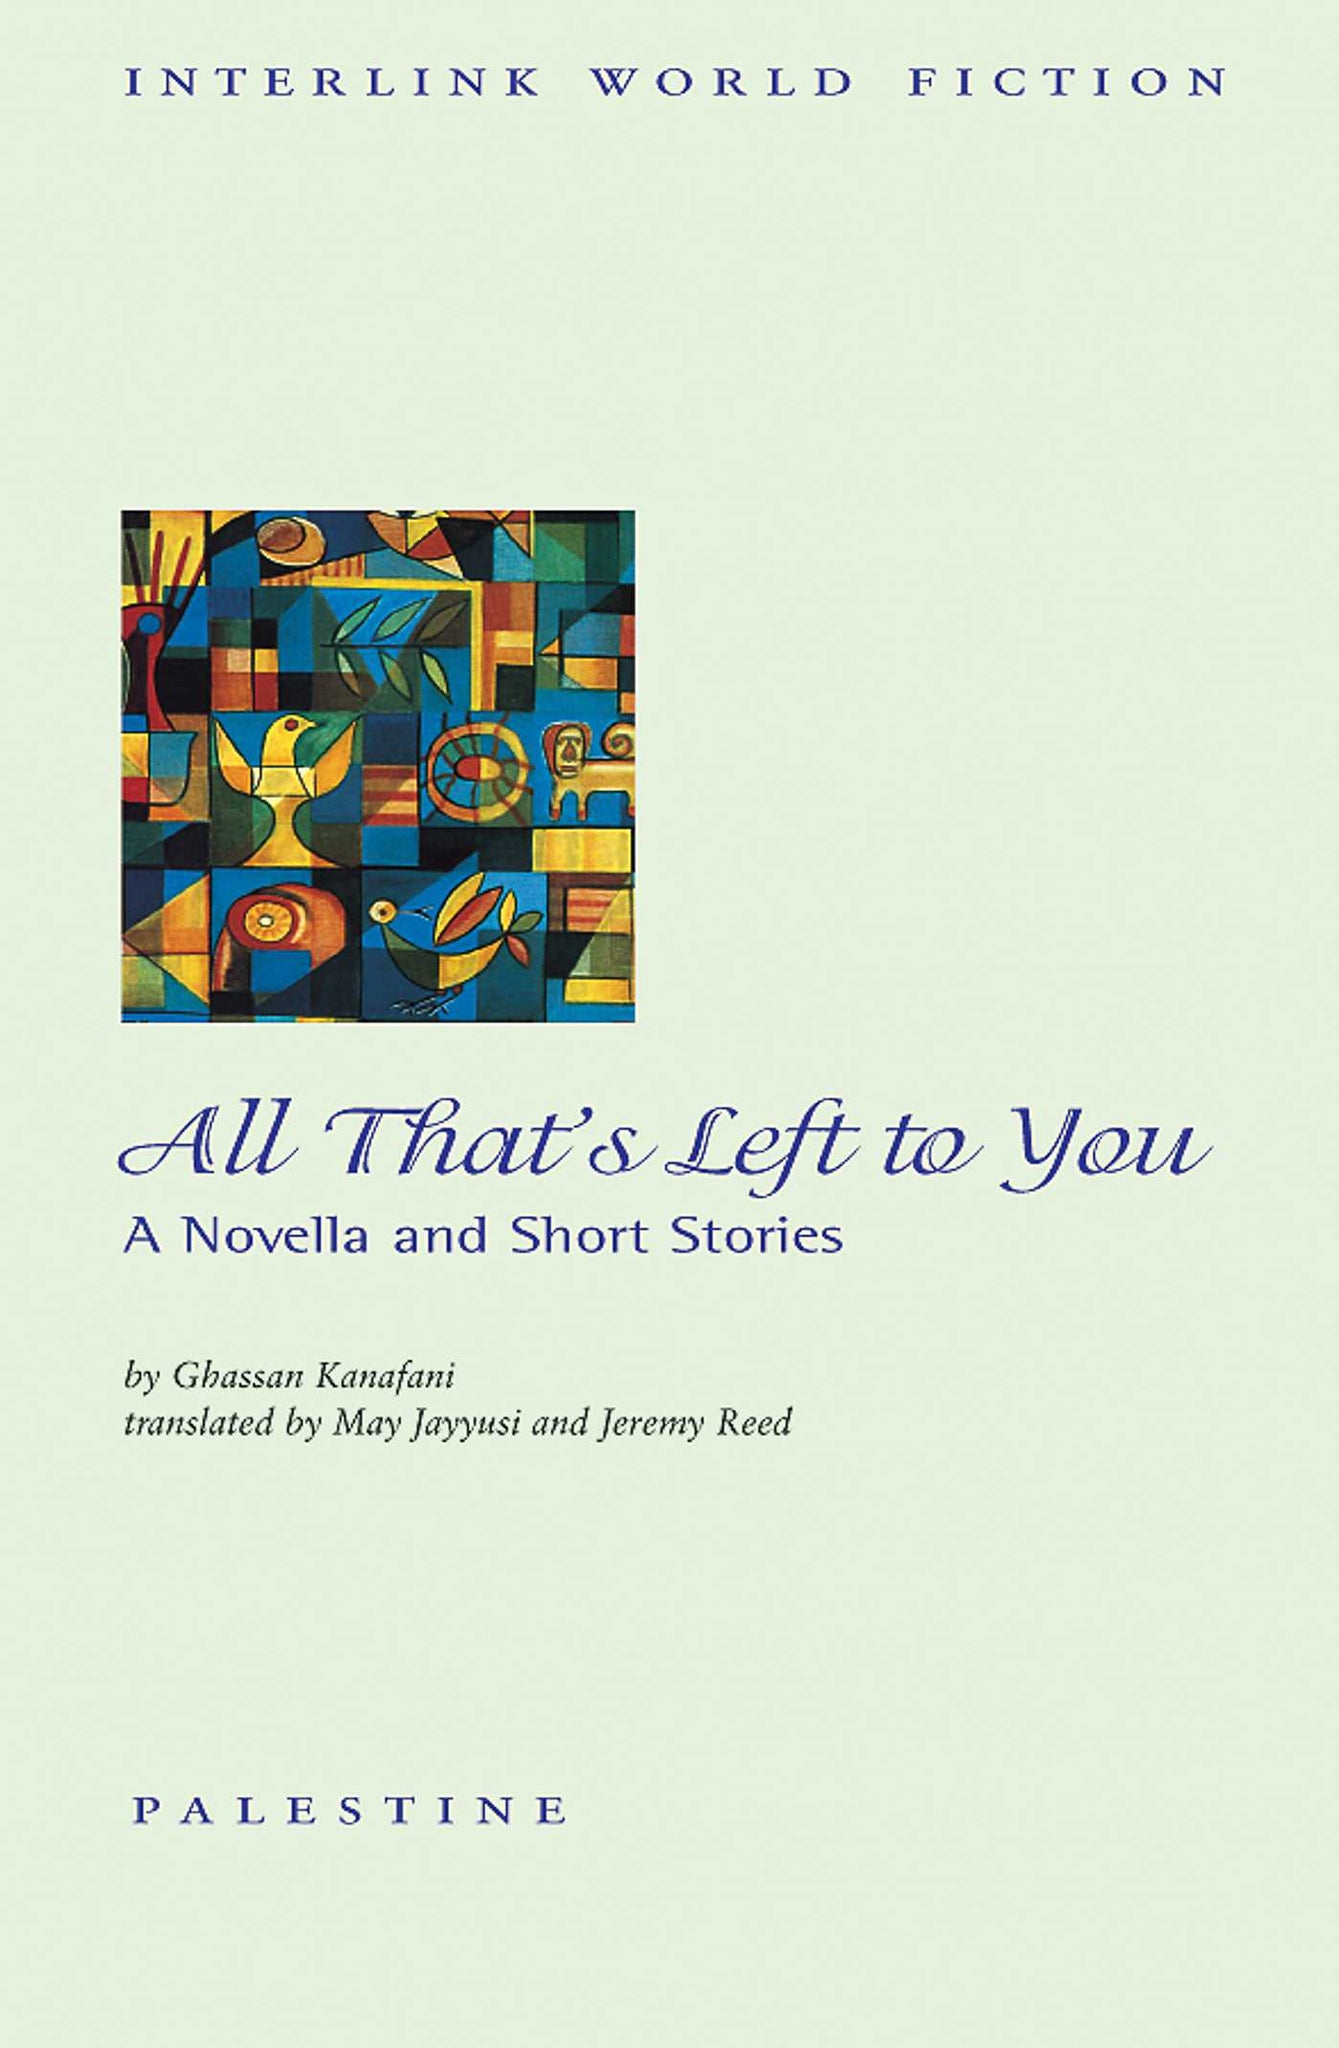 All that's Left to You : A Novella and Other Stories